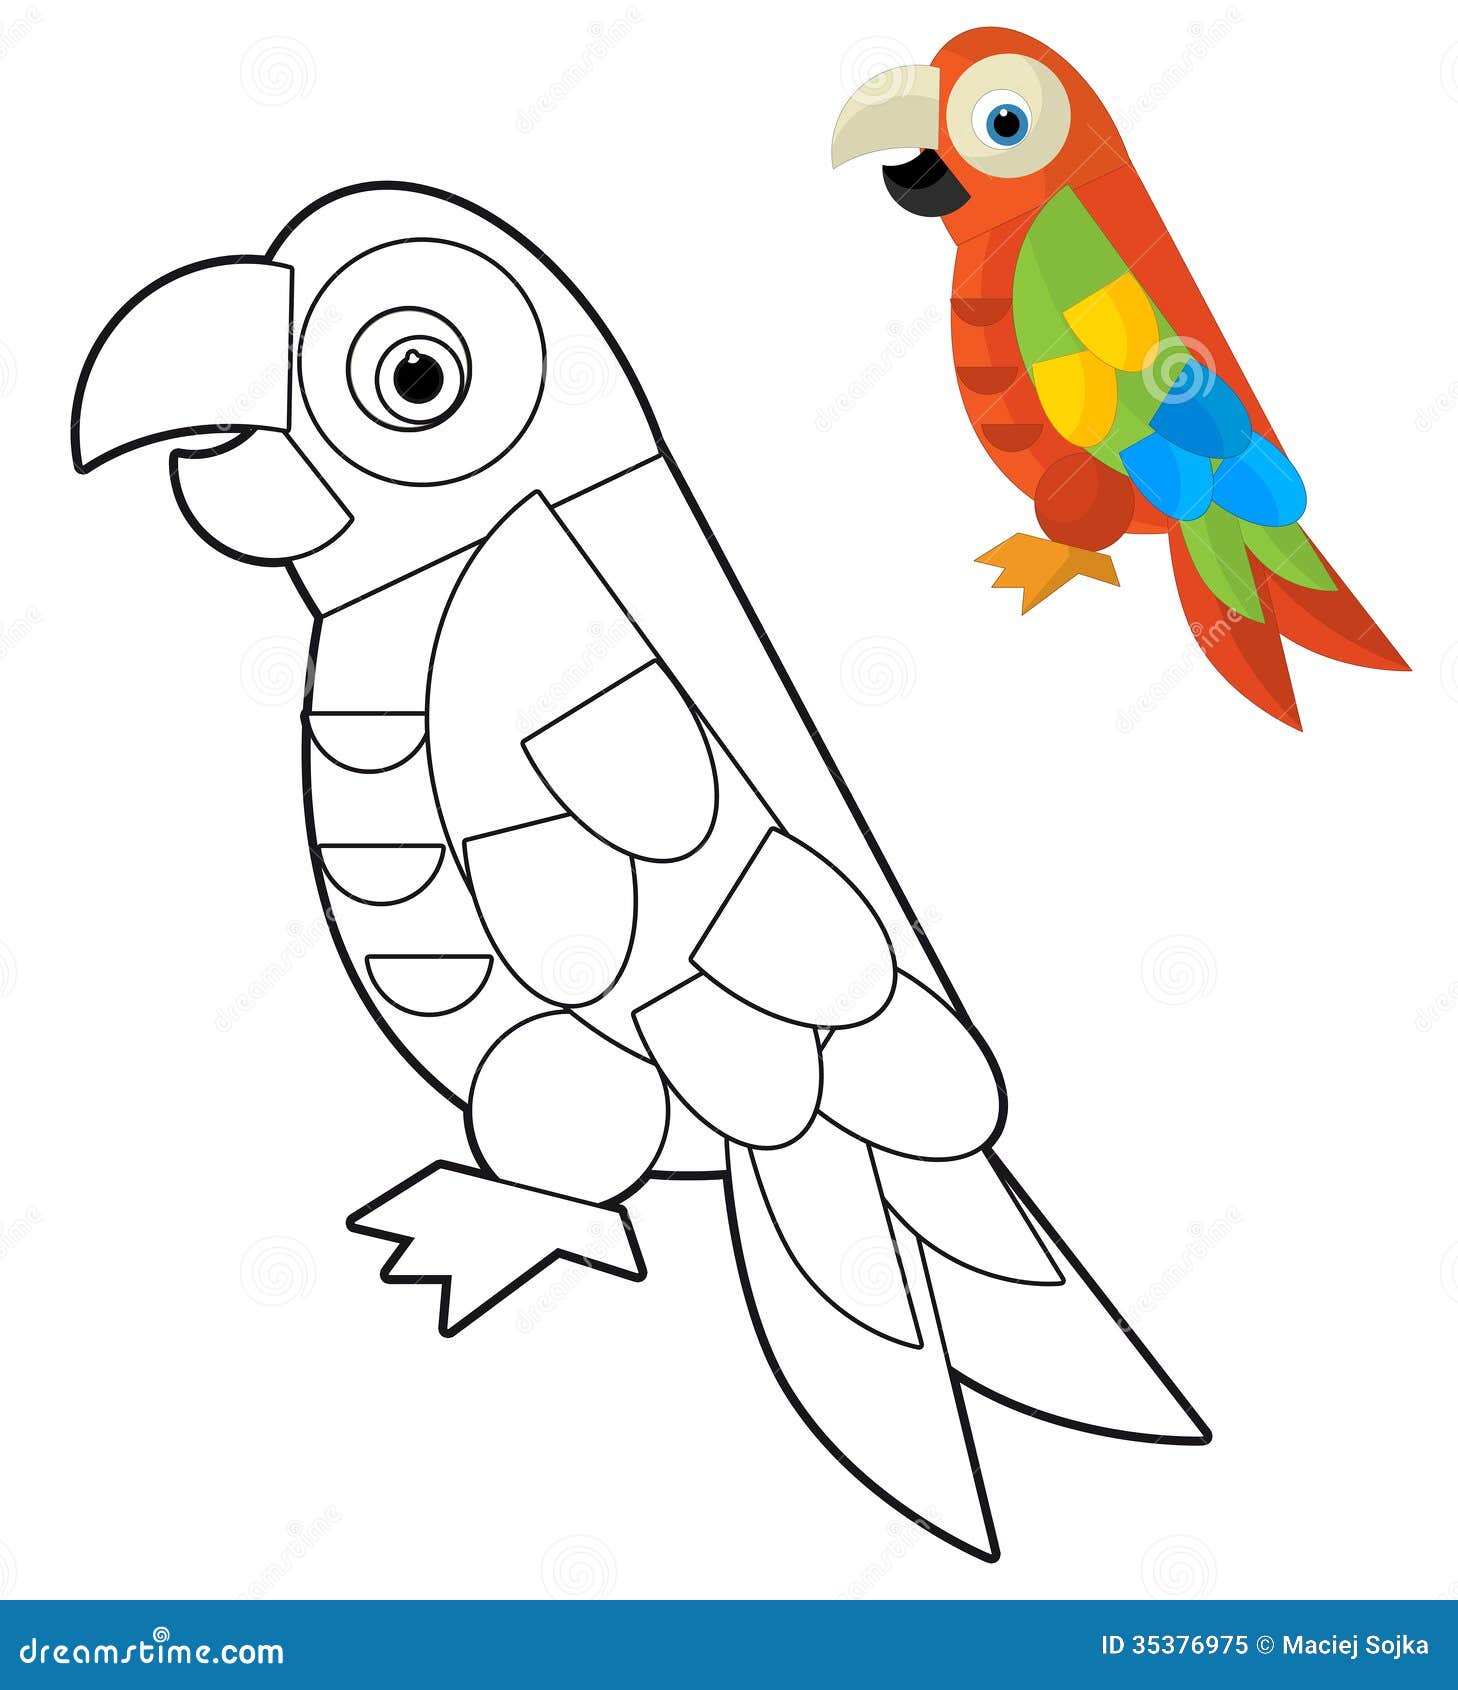 Cartoon Animal Coloring Page Illustration For The Children